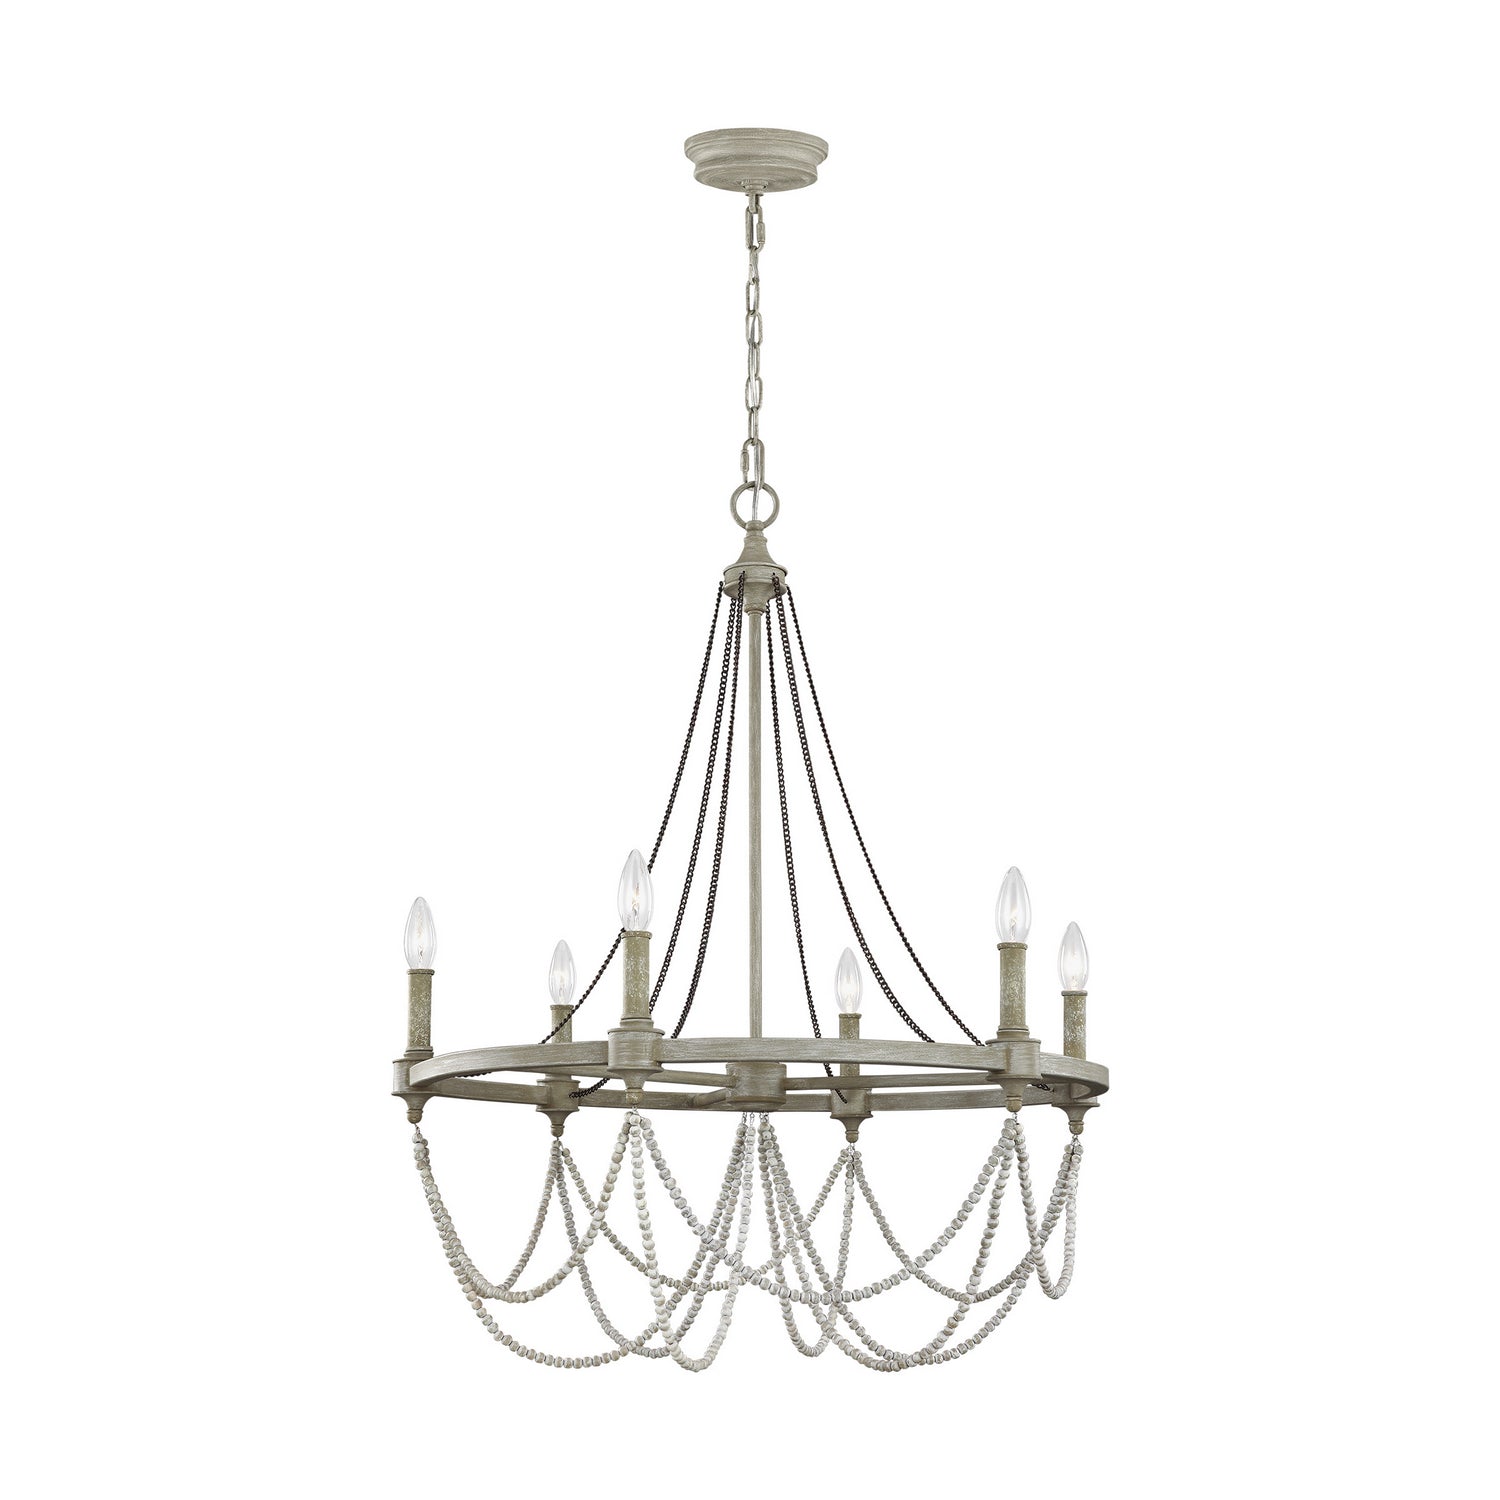 Visual Comfort Studio Canada - F3132/6FWO/DWW - Six Light Chandelier - Beverly - French Washed Oak / Distressed White Wood